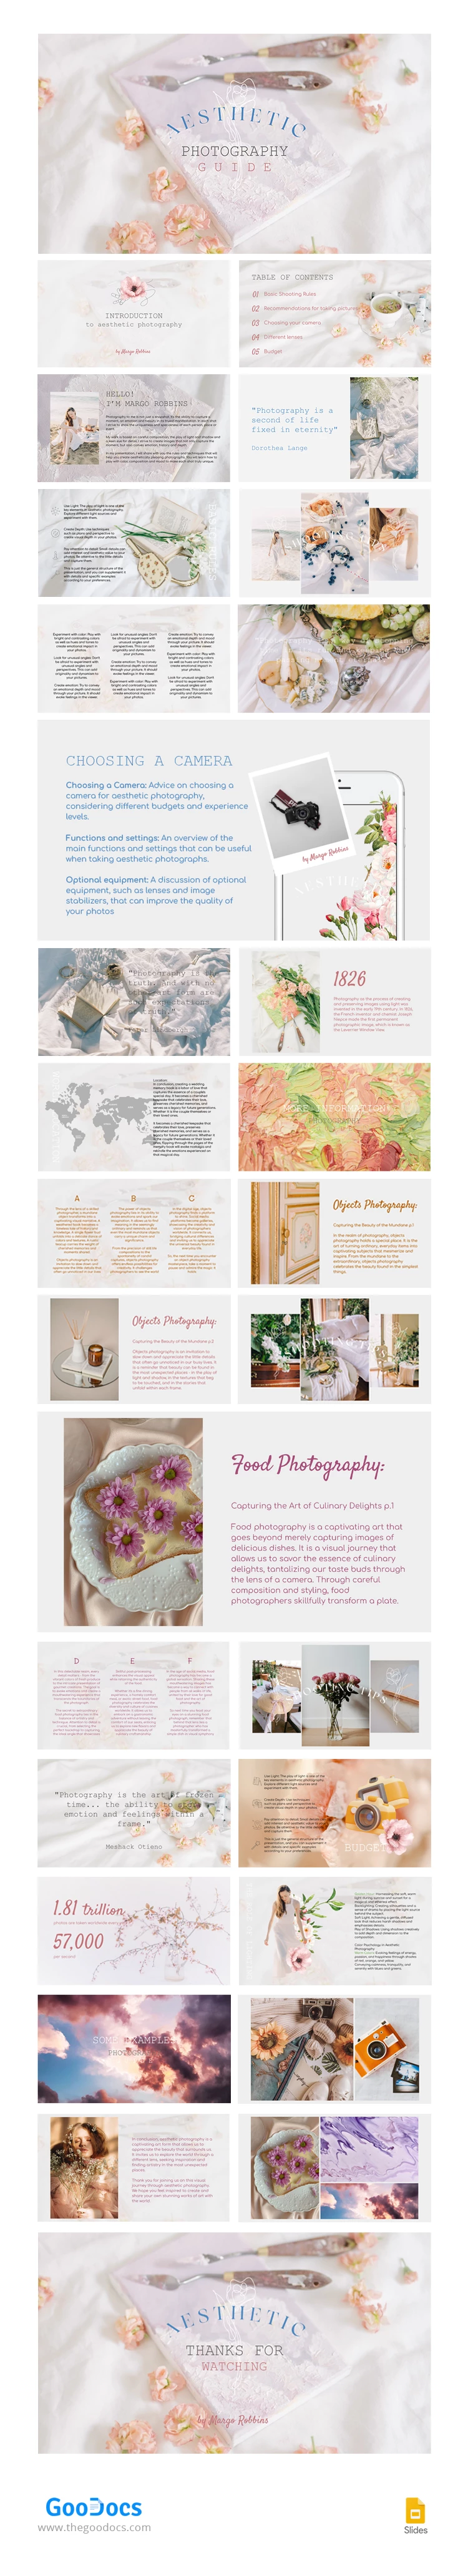 Aesthetic Photography Guide - free Google Docs Template - 10066984